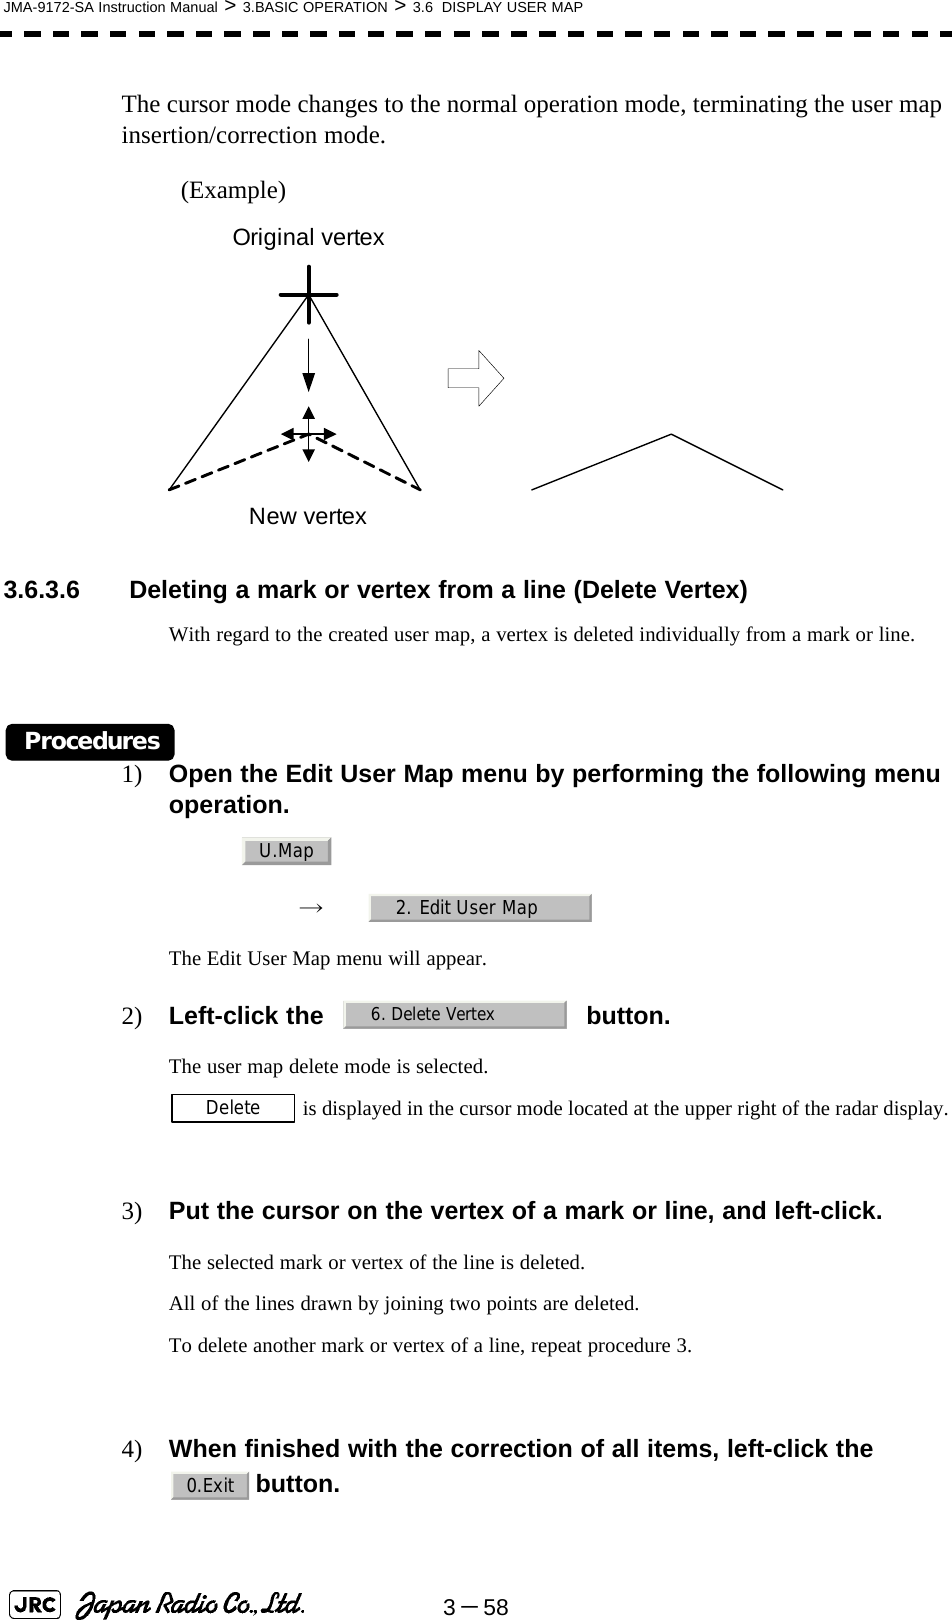 3－58JMA-9172-SA Instruction Manual &gt; 3.BASIC OPERATION &gt; 3.6  DISPLAY USER MAPThe cursor mode changes to the normal operation mode, terminating the user map insertion/correction mode.(Example)3.6.3.6  Deleting a mark or vertex from a line (Delete Vertex)With regard to the created user map, a vertex is deleted individually from a mark or line.Procedures1) Open the Edit User Map menu by performing the following menu operation.→　The Edit User Map menu will appear.2) Left-click the button.The user map delete mode is selected. is displayed in the cursor mode located at the upper right of the radar display.3) Put the cursor on the vertex of a mark or line, and left-click.The selected mark or vertex of the line is deleted.All of the lines drawn by joining two points are deleted.To delete another mark or vertex of a line, repeat procedure 3.4) When finished with the correction of all items, left-click the button.Original vertexNew vertexU.Map2. Edit User Map6. Delete VertexDelete0.Exit